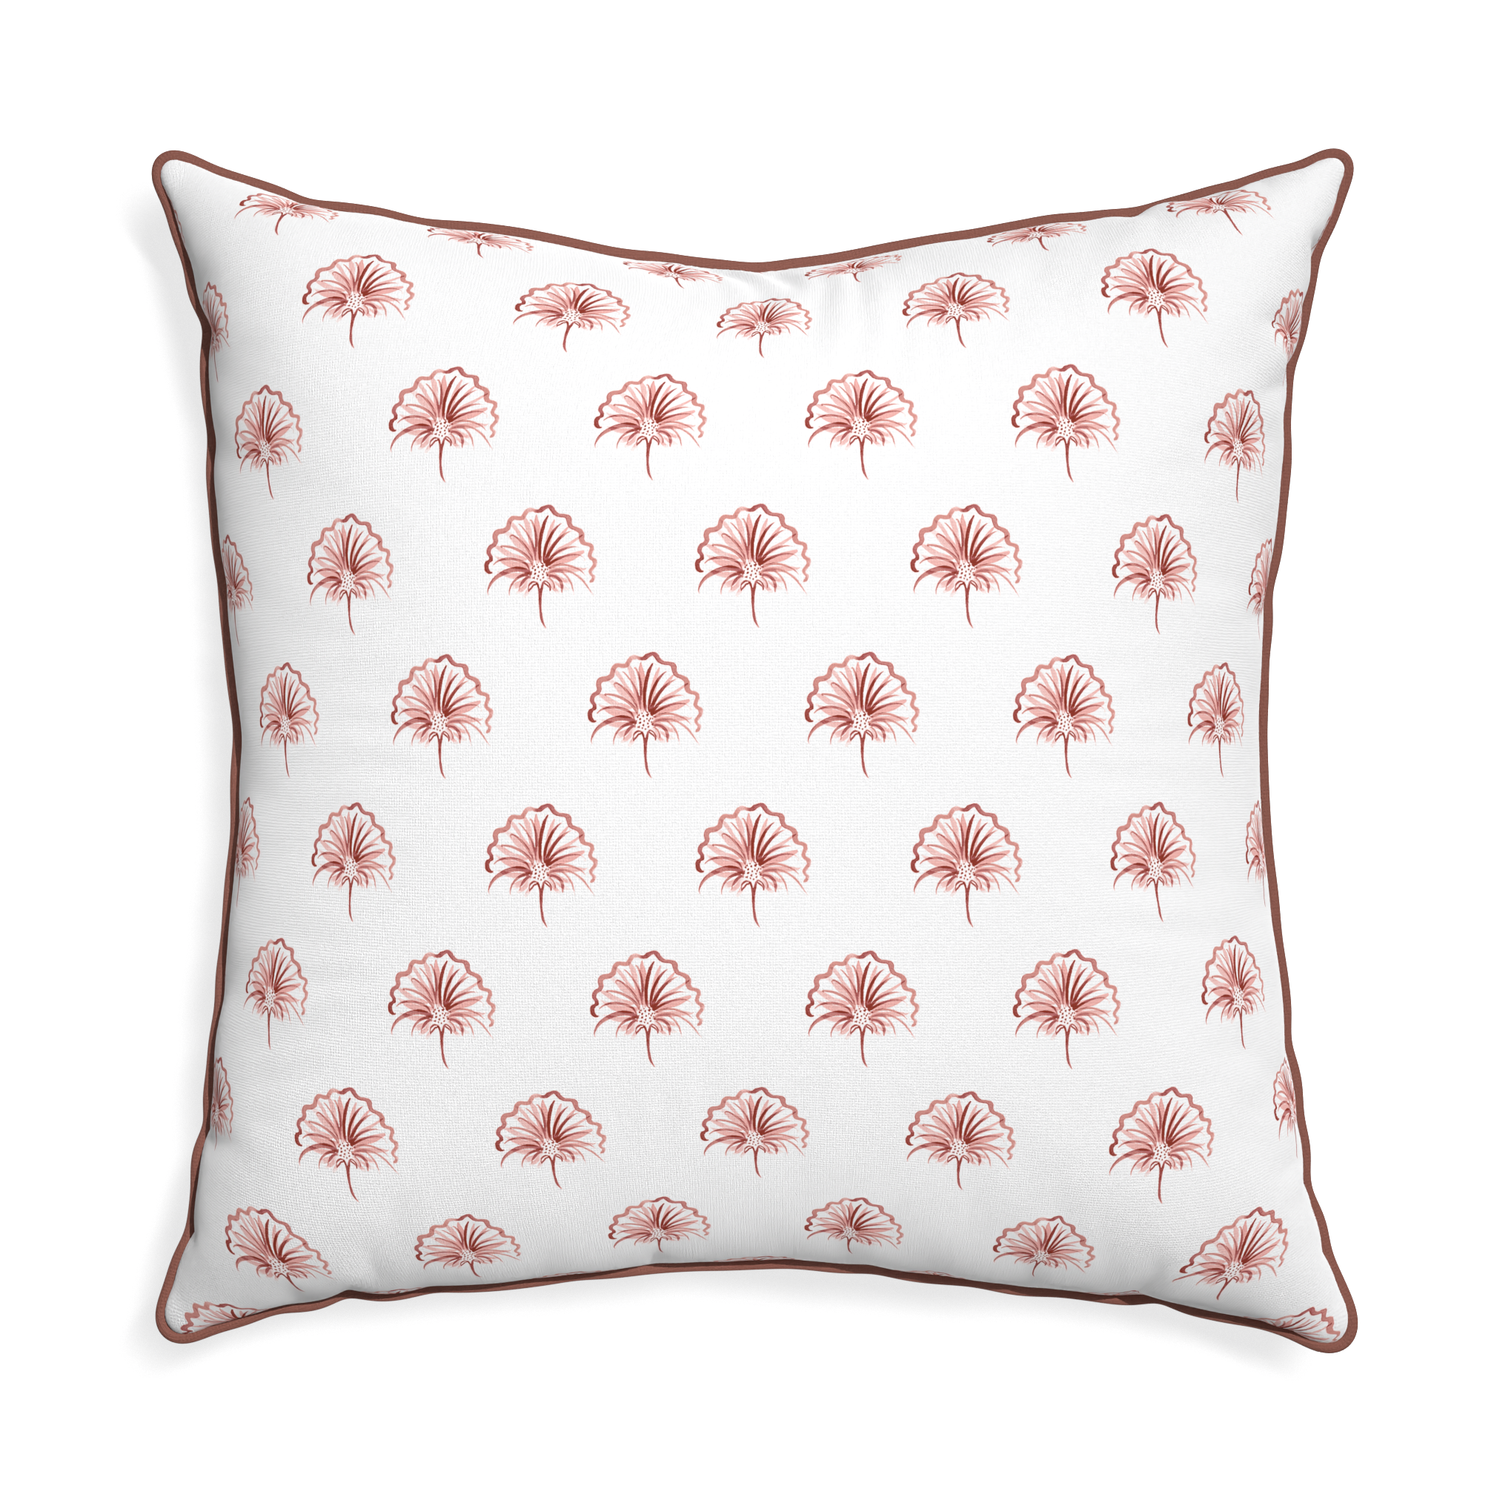 Euro-sham penelope rose custom floral pinkpillow with w piping on white background